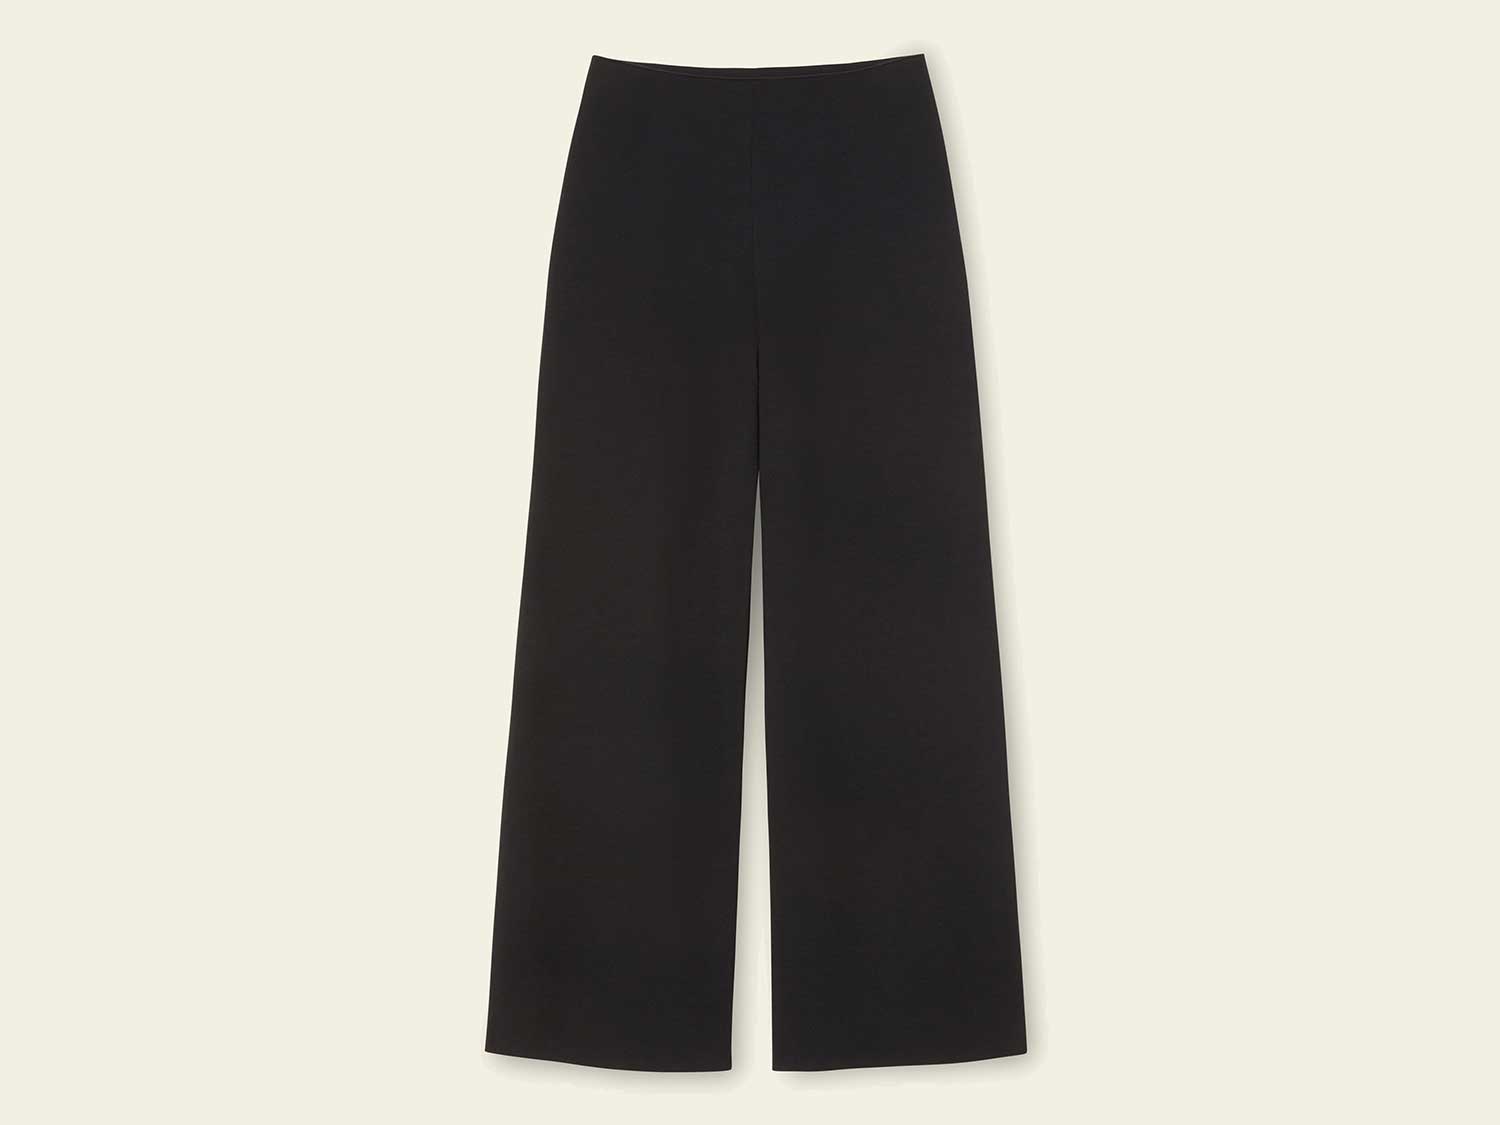 5 Stylish, Stretchy Pants to Wear to Holiday Dinner | Saveur